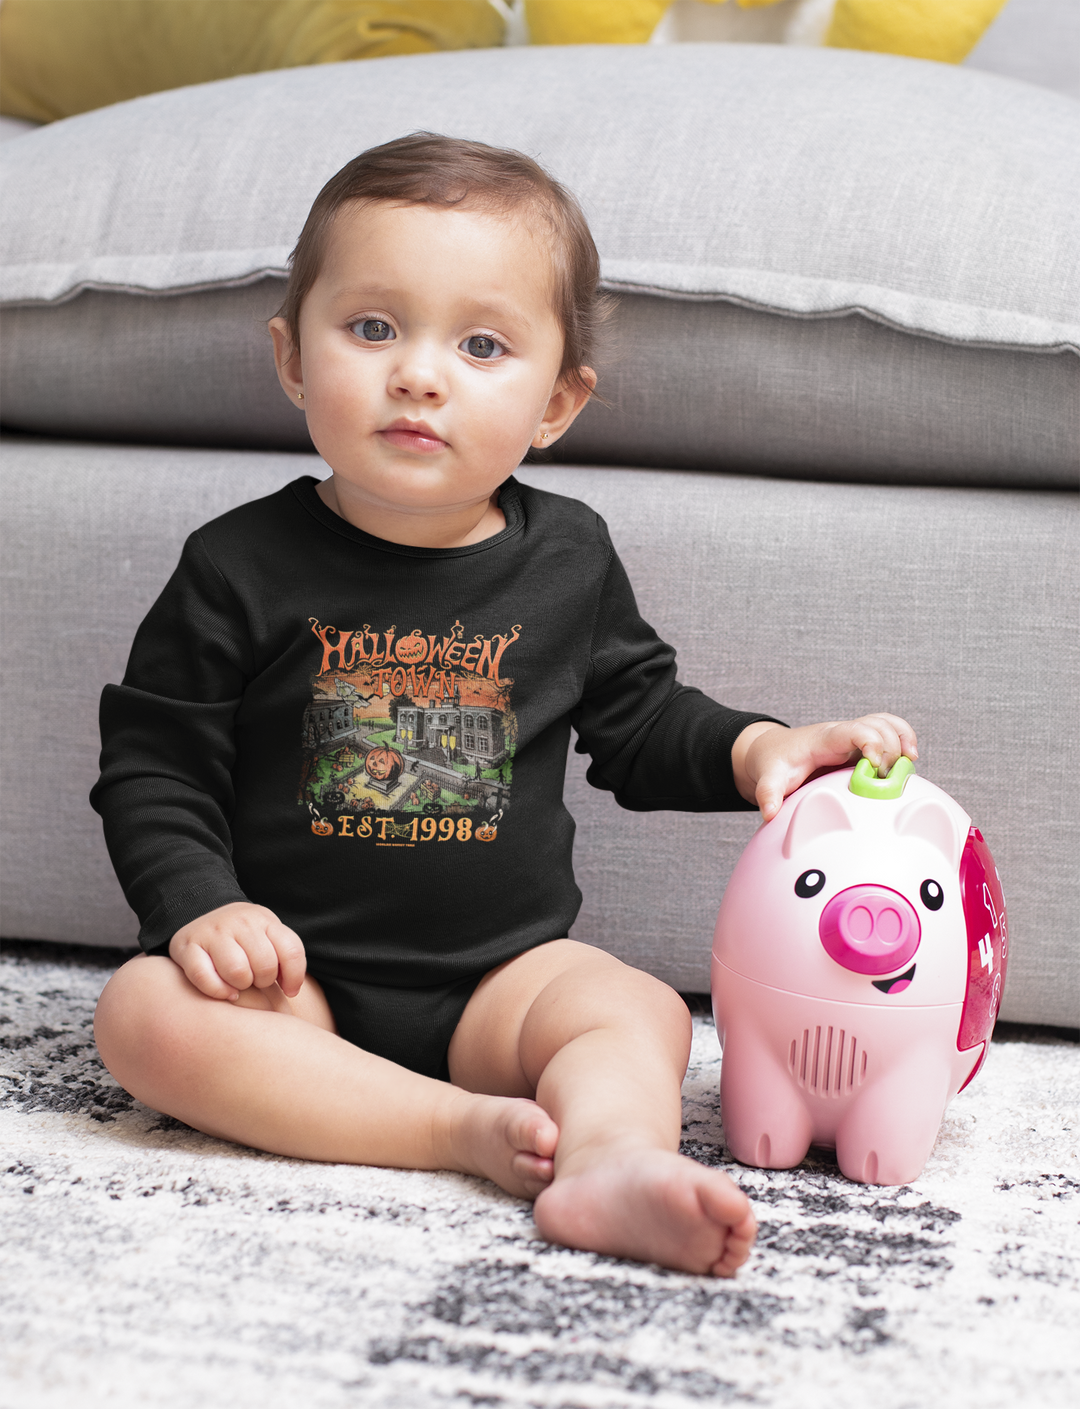 A baby in a black shirt with a house and pumpkins drawing, sitting with a toy pig. Halloweentown Long Sleeved Onesie for infants, featuring ribbed bindings and plastic snaps for easy changing.